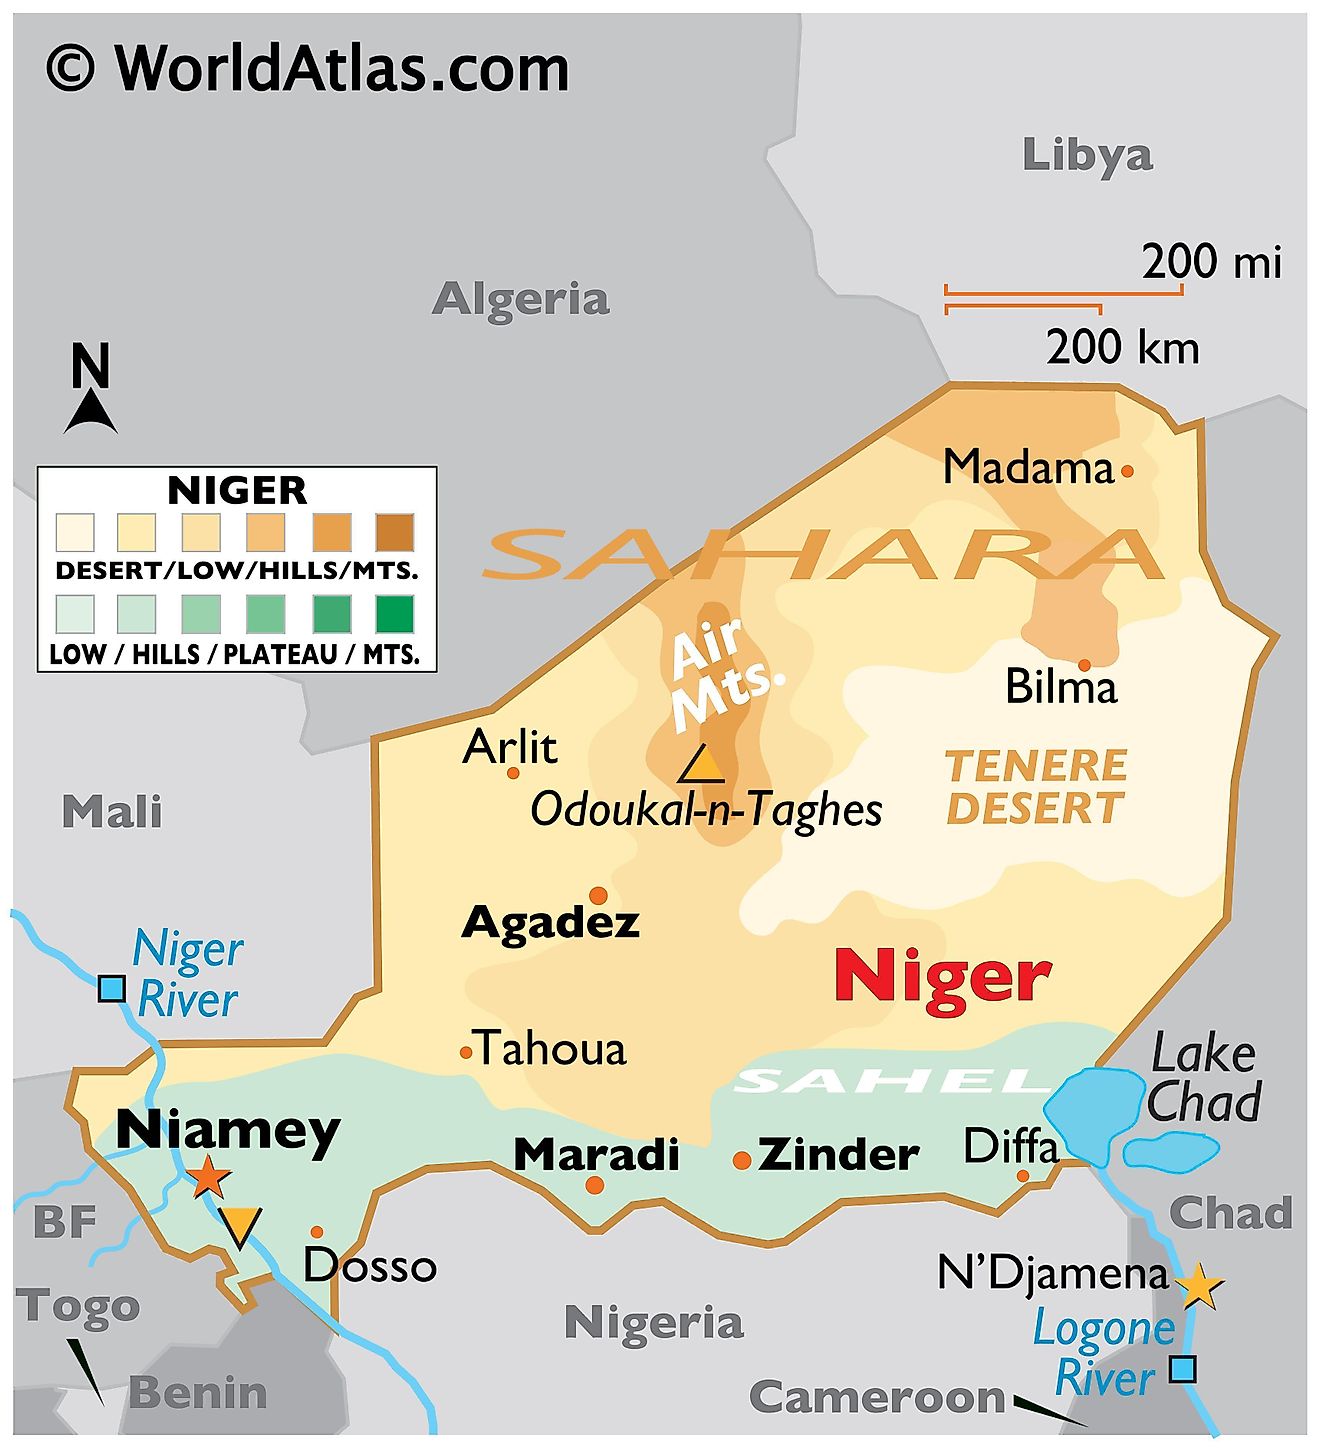 Physical Map of Niger with state boundaries. It shows the physical features of Niger with relief, major mountain peaks, rivers, lakes, major cities, etc.